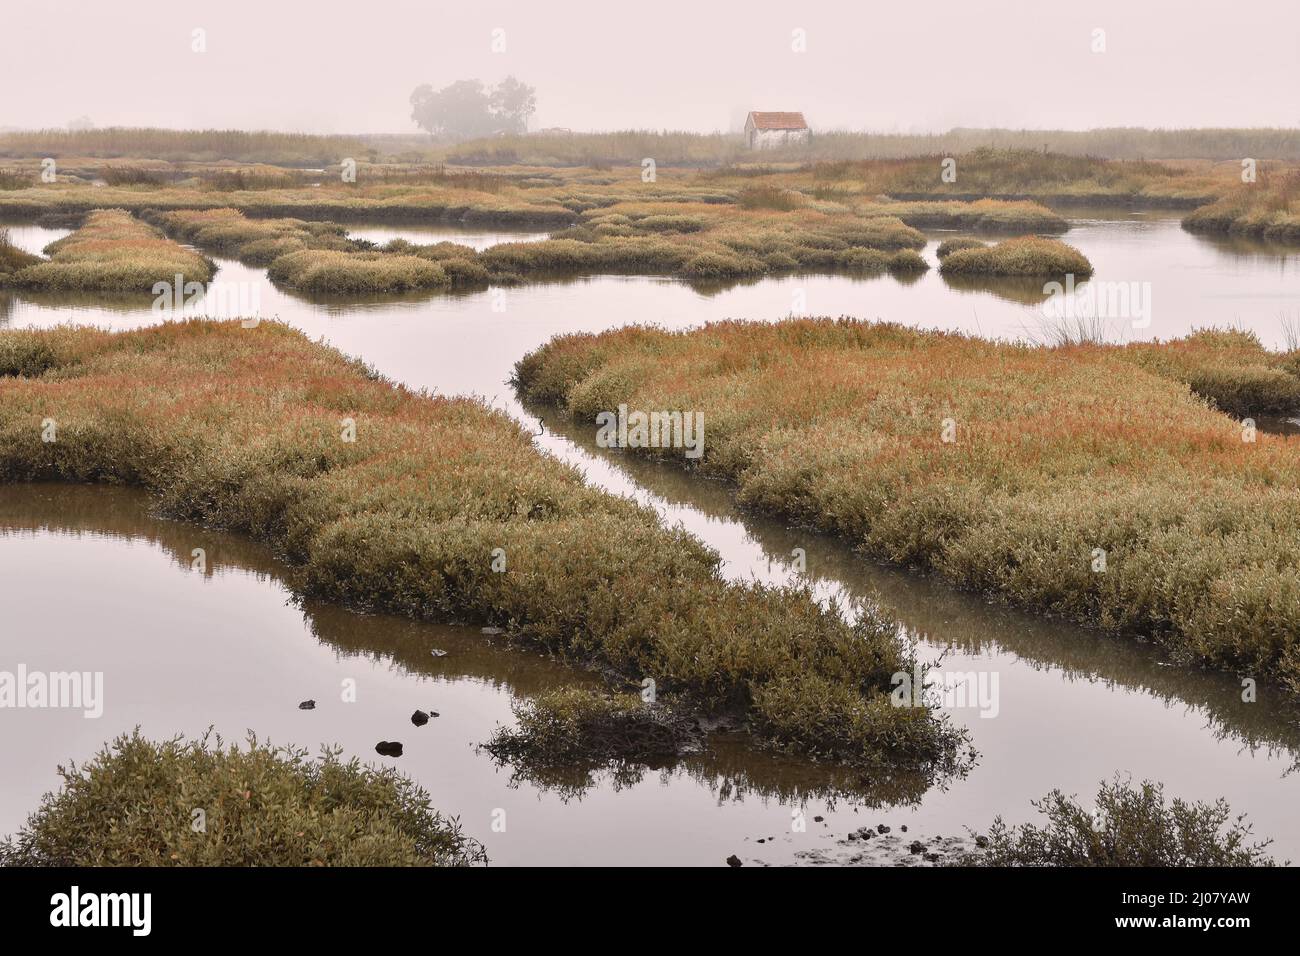 Grassy wetlands area with sea purslane (Halimione portulacoides) plants, foggy weather in Aveiro Portugal. Stock Photo